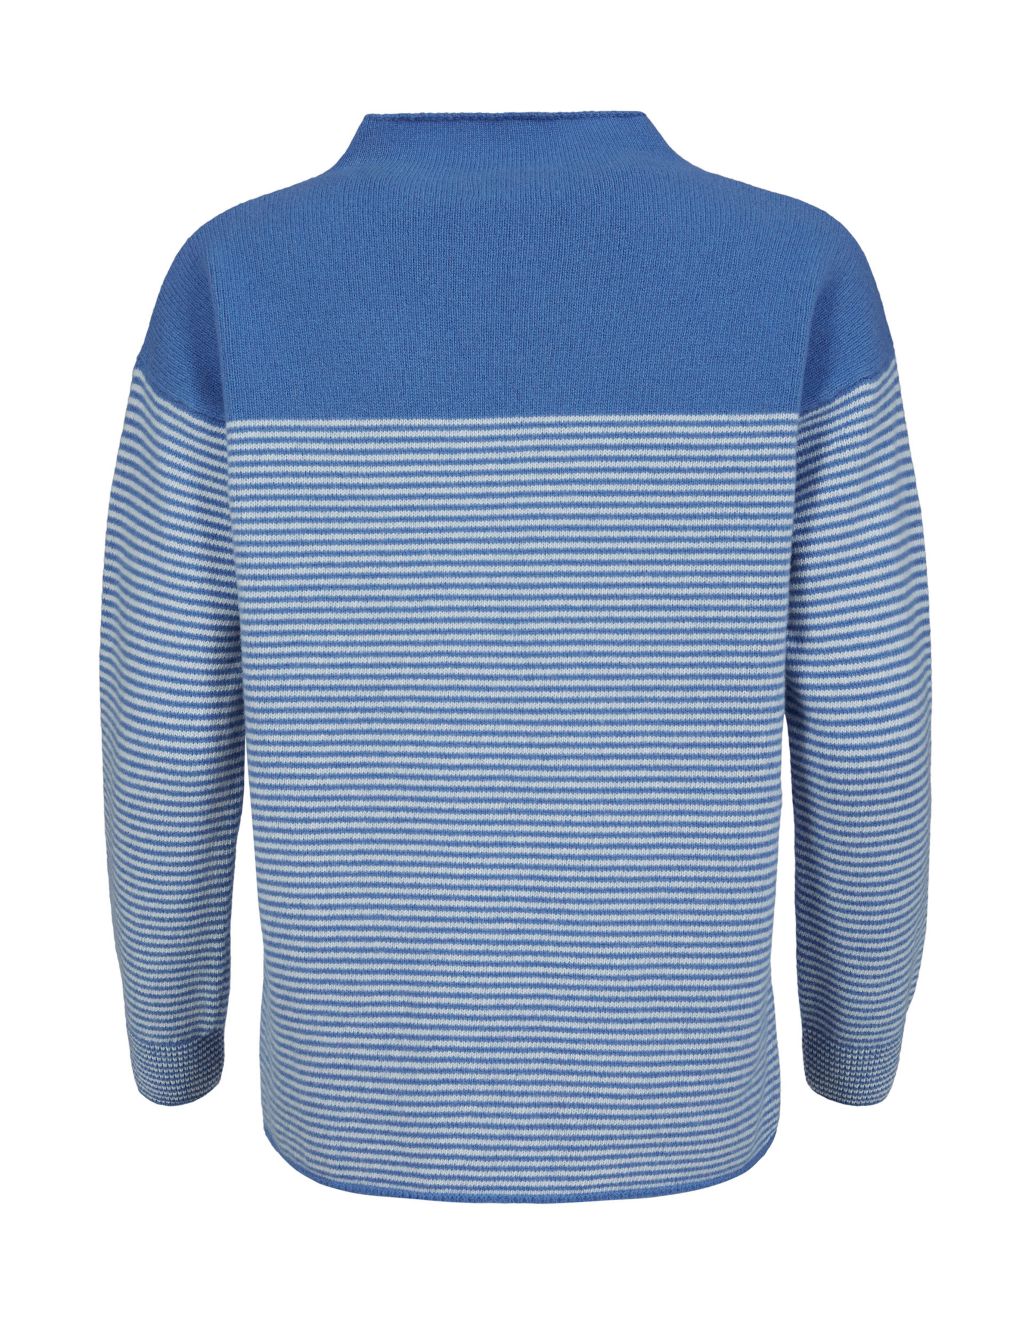 Pure Lambswool Striped Funnel Neck Jumper image 6